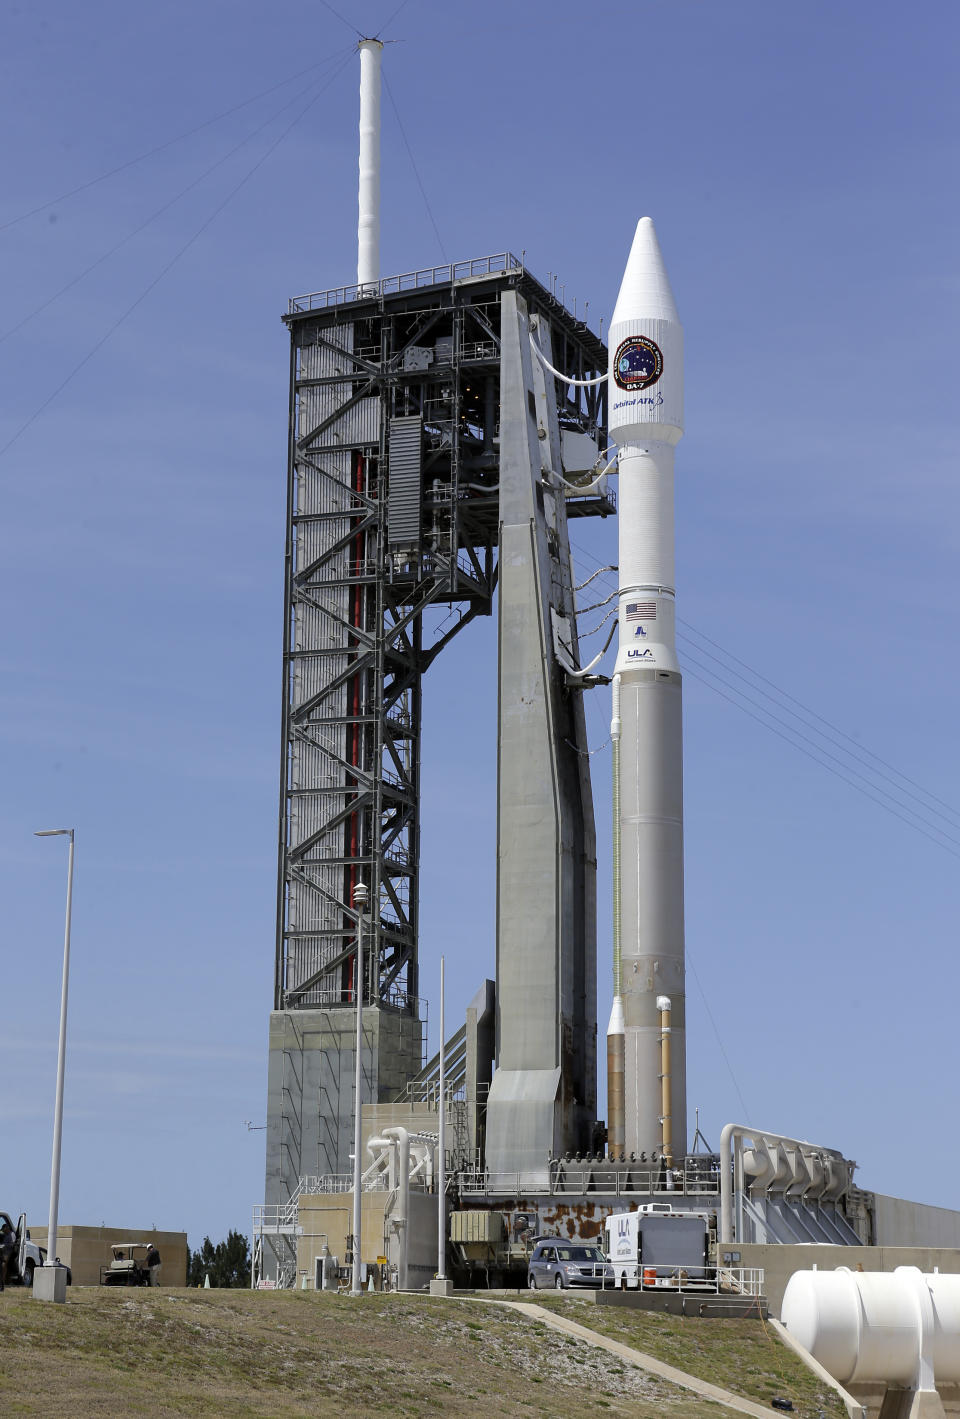 A United Launch Alliance Atlas V rocket that will carry supplies to the International Space Station stands ready at complex 41 at the Cape Canaveral Air Force Station, Monday, April 17, 2017, in Cape Canaveral, Fla. The launch is scheduled for Tuesday morning and for the first time, NASA cameras will provide live 360-degree video of the rocket heading toward space. (AP Photo/John Raoux)